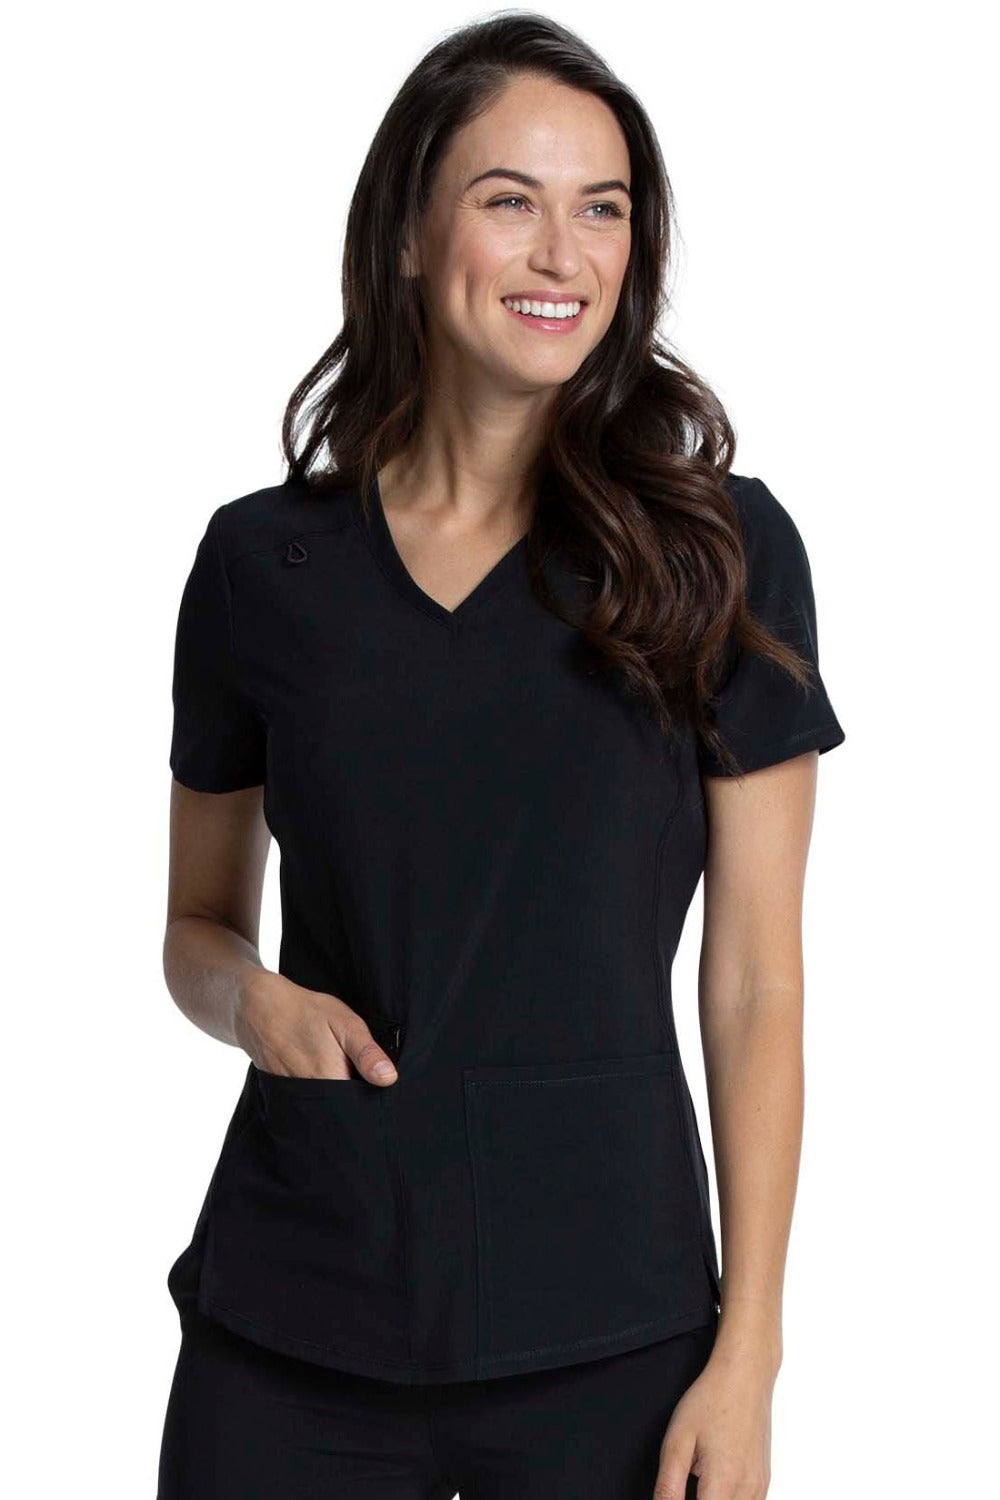 Cherokee Allura V-Neck Scrub Top in Black at Parker's Clothing and Shoes.